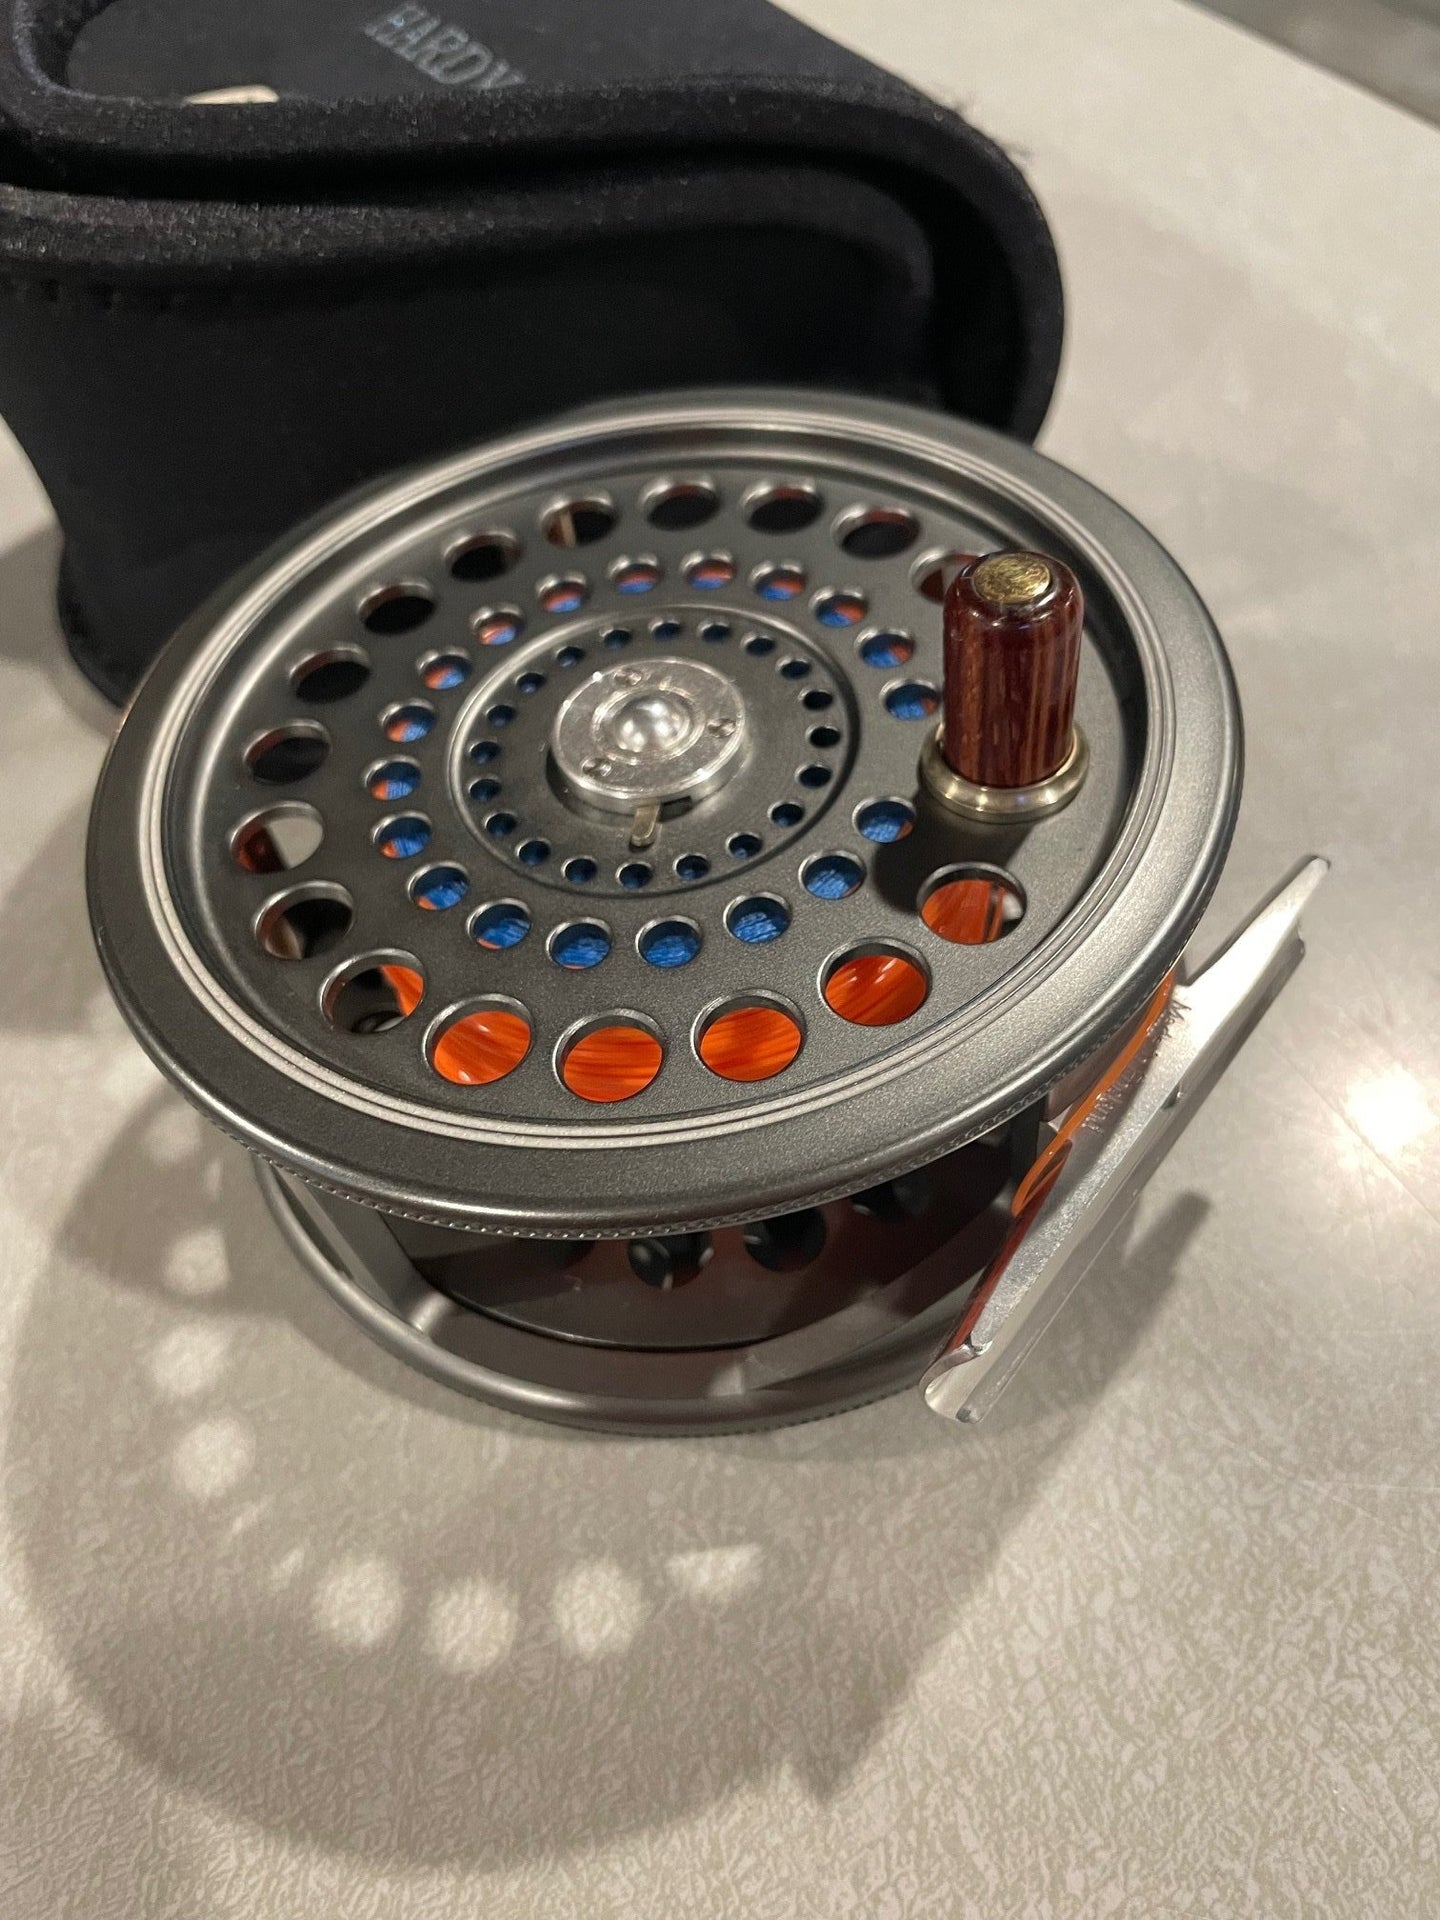 HARDY ST GEORGE MKII FLY REEL W/ SPARE SPOOL — Fly Life Company